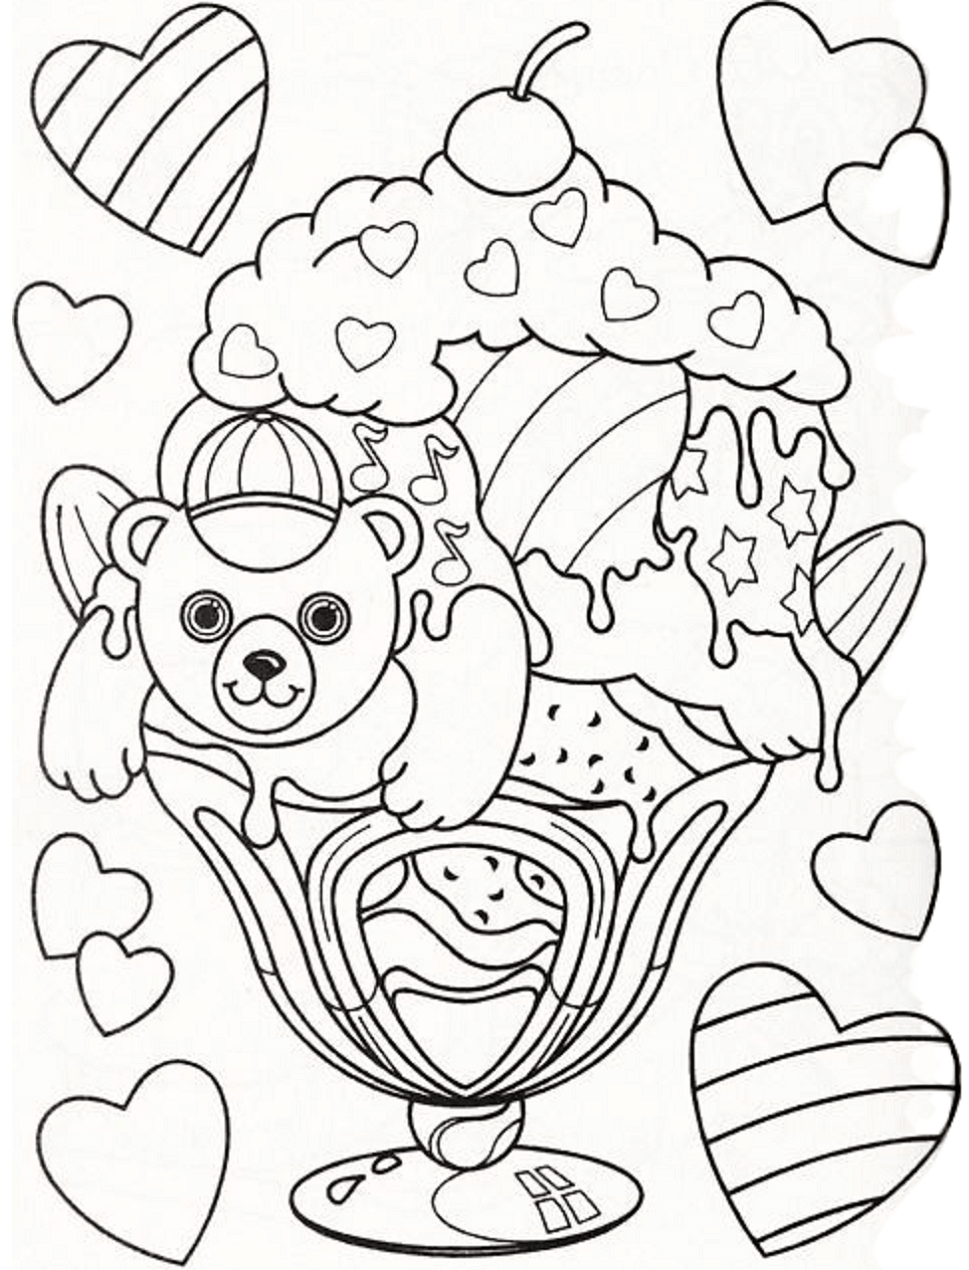 hollywood-bear-lisa-frank-coloring-page-free-printable-coloring-pages